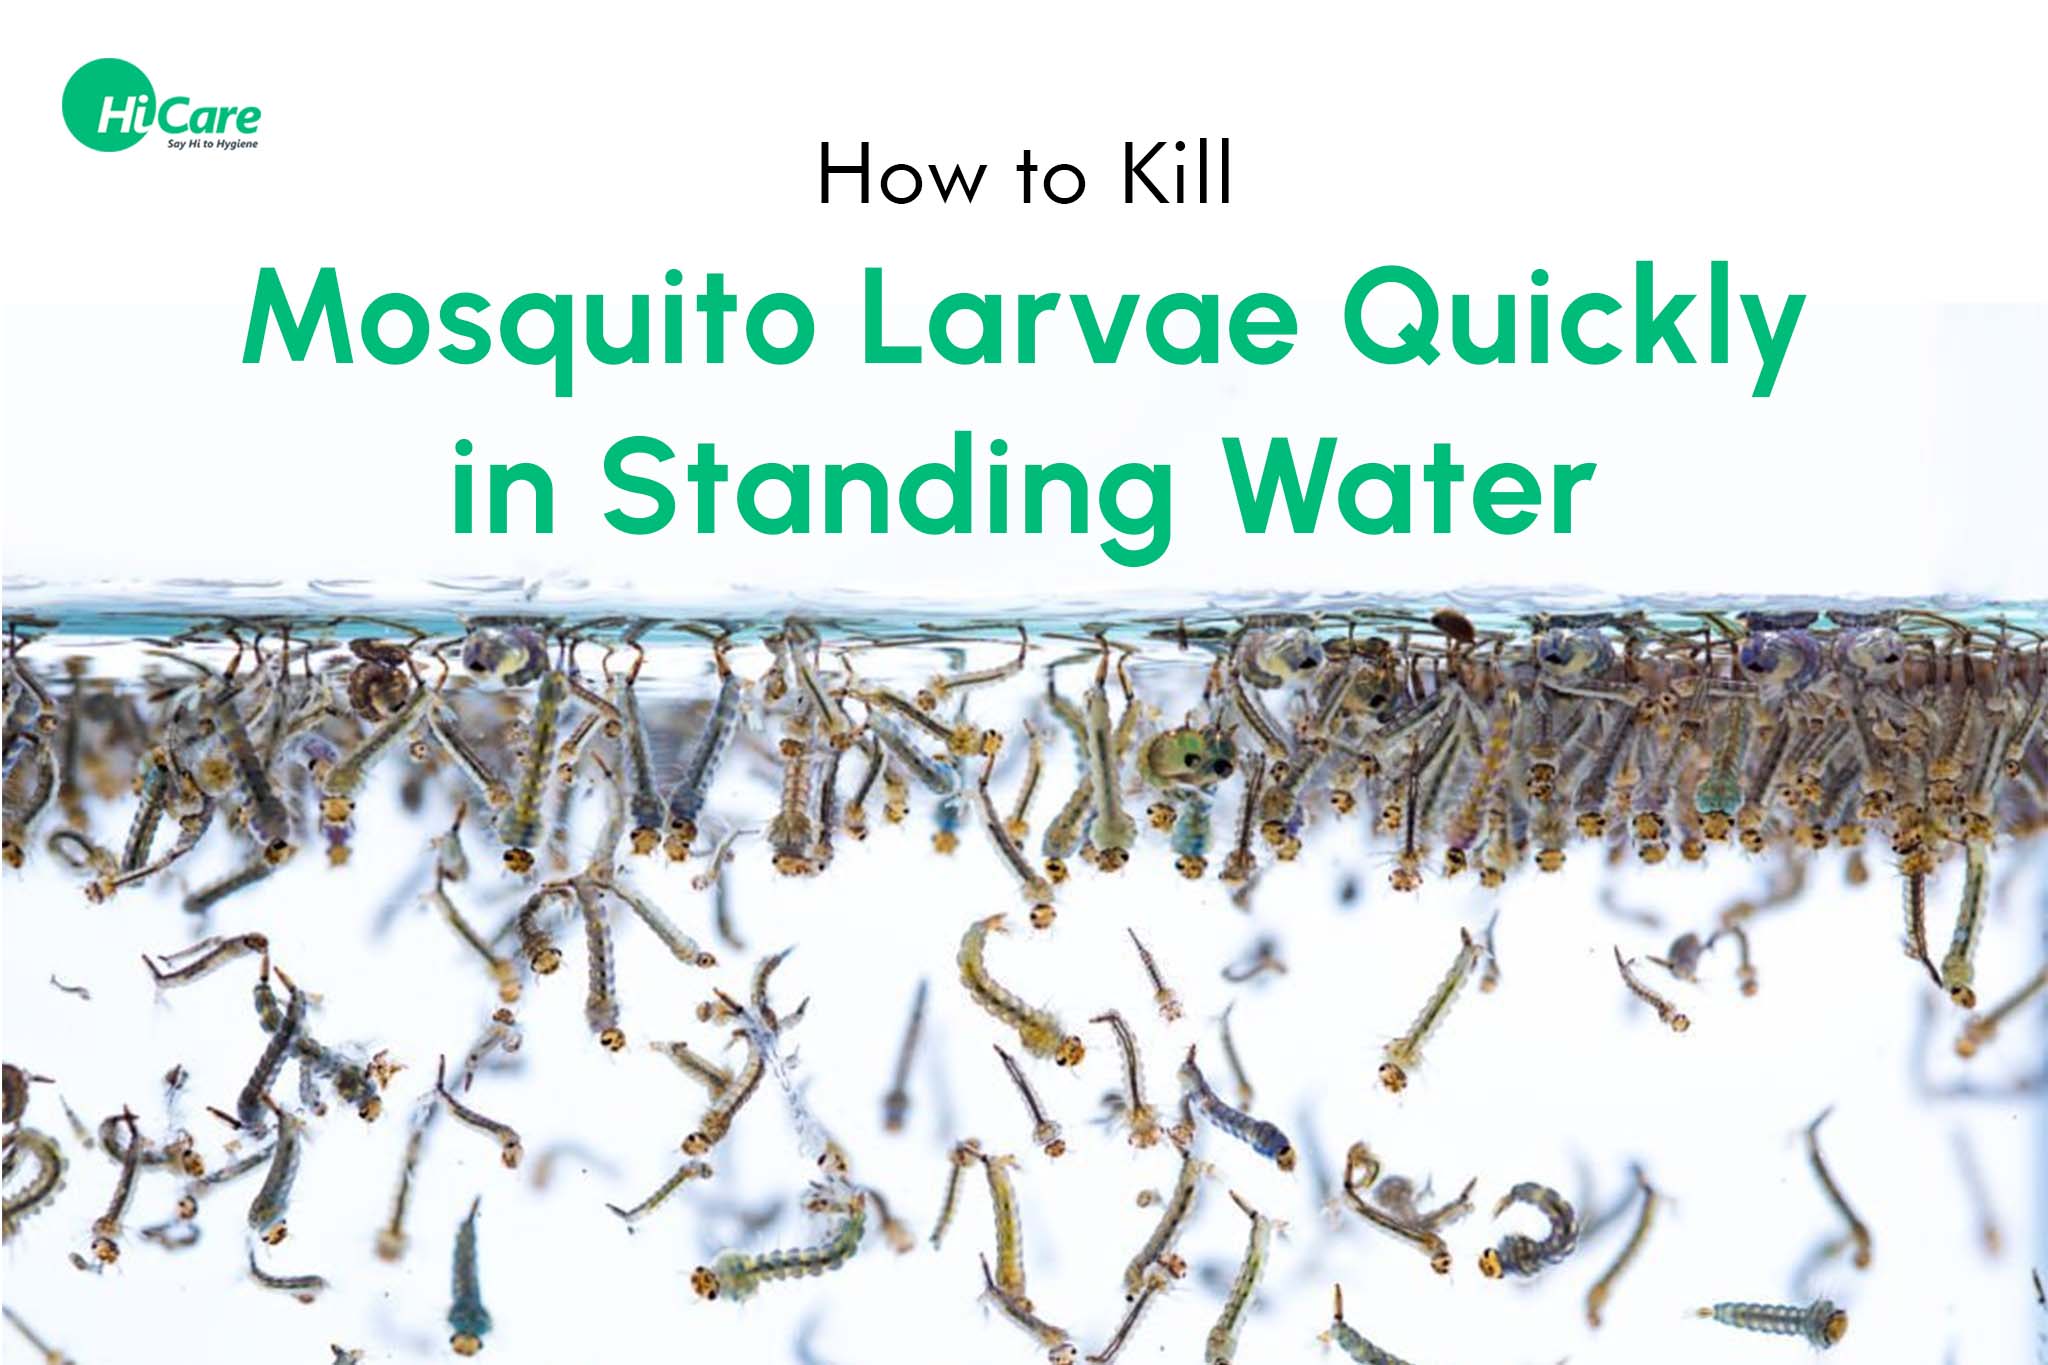 How to Kill Mosquito Larvae Quickly in Standing Water